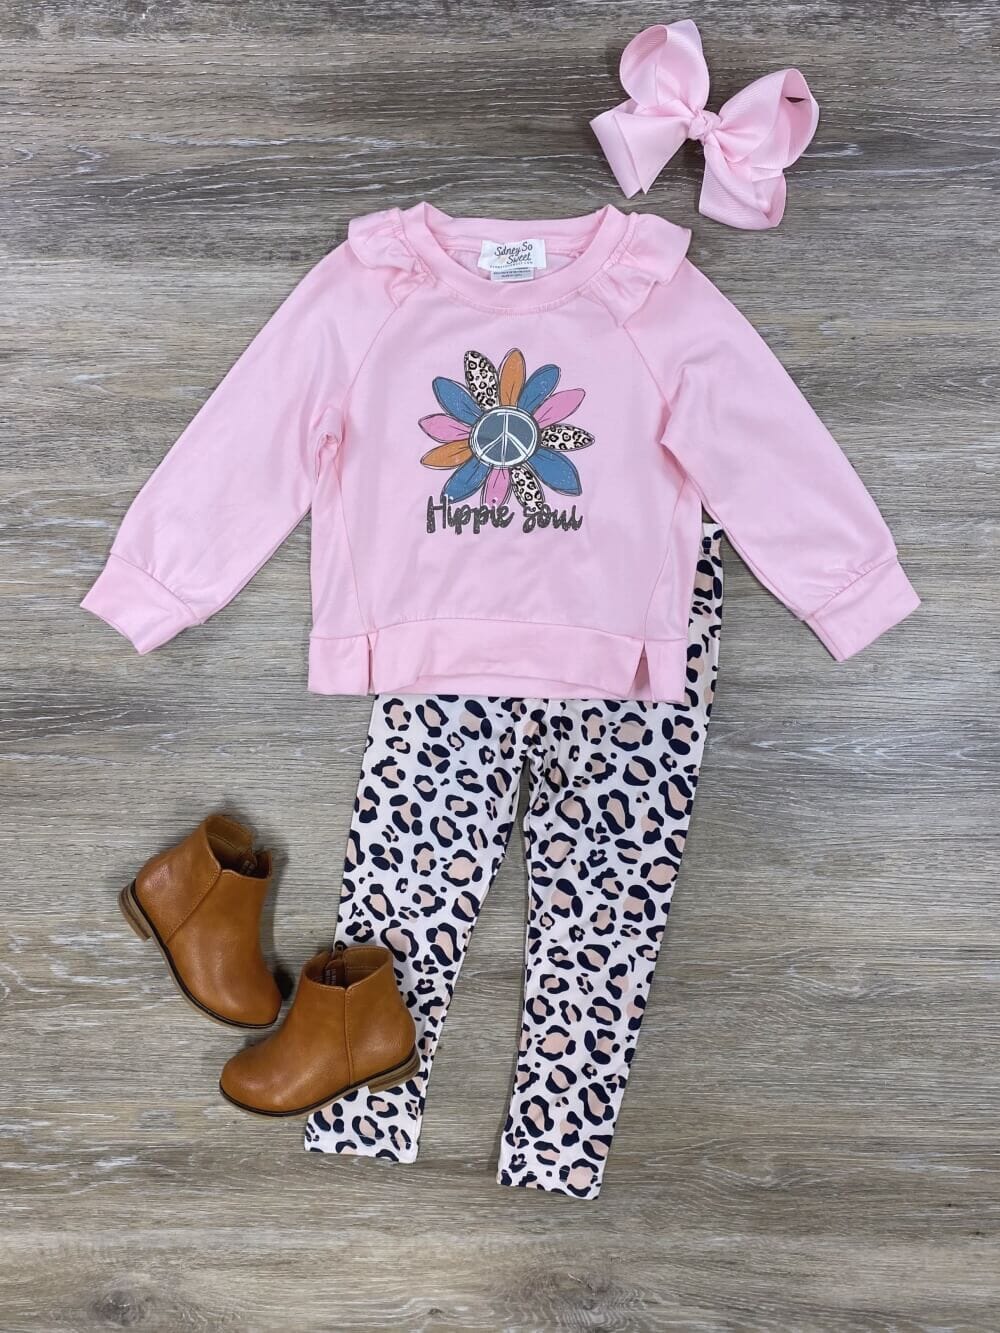 Hippie Soul Pink Feather Animal Print Leggings Outfit - Sydney So Sweet